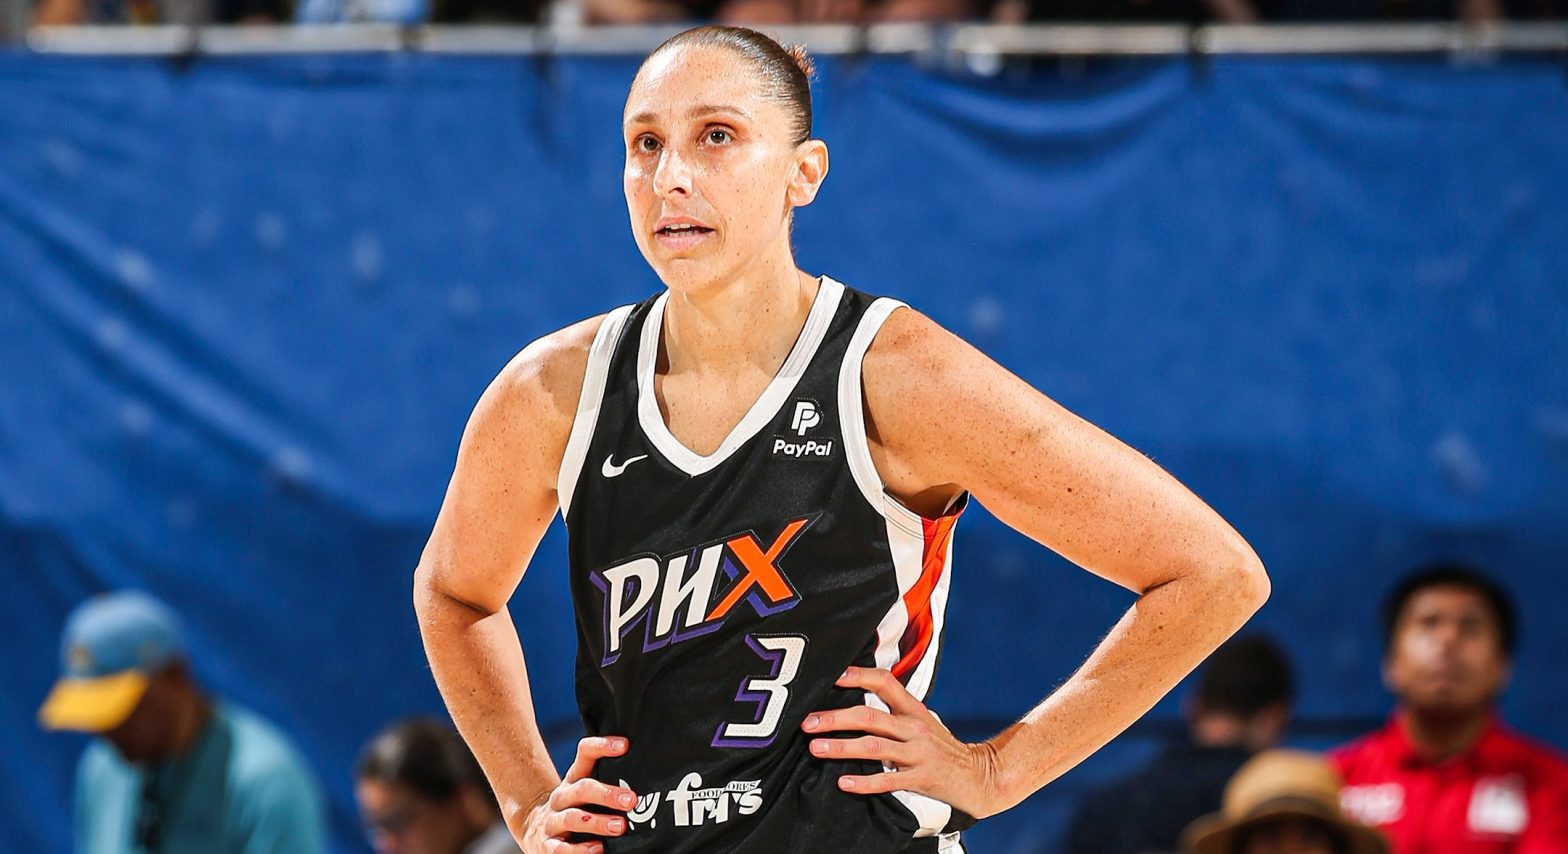 Who is Diana Taurasi? Phoenix Mercury legend becomes first WNBA player to reach 10,000 points